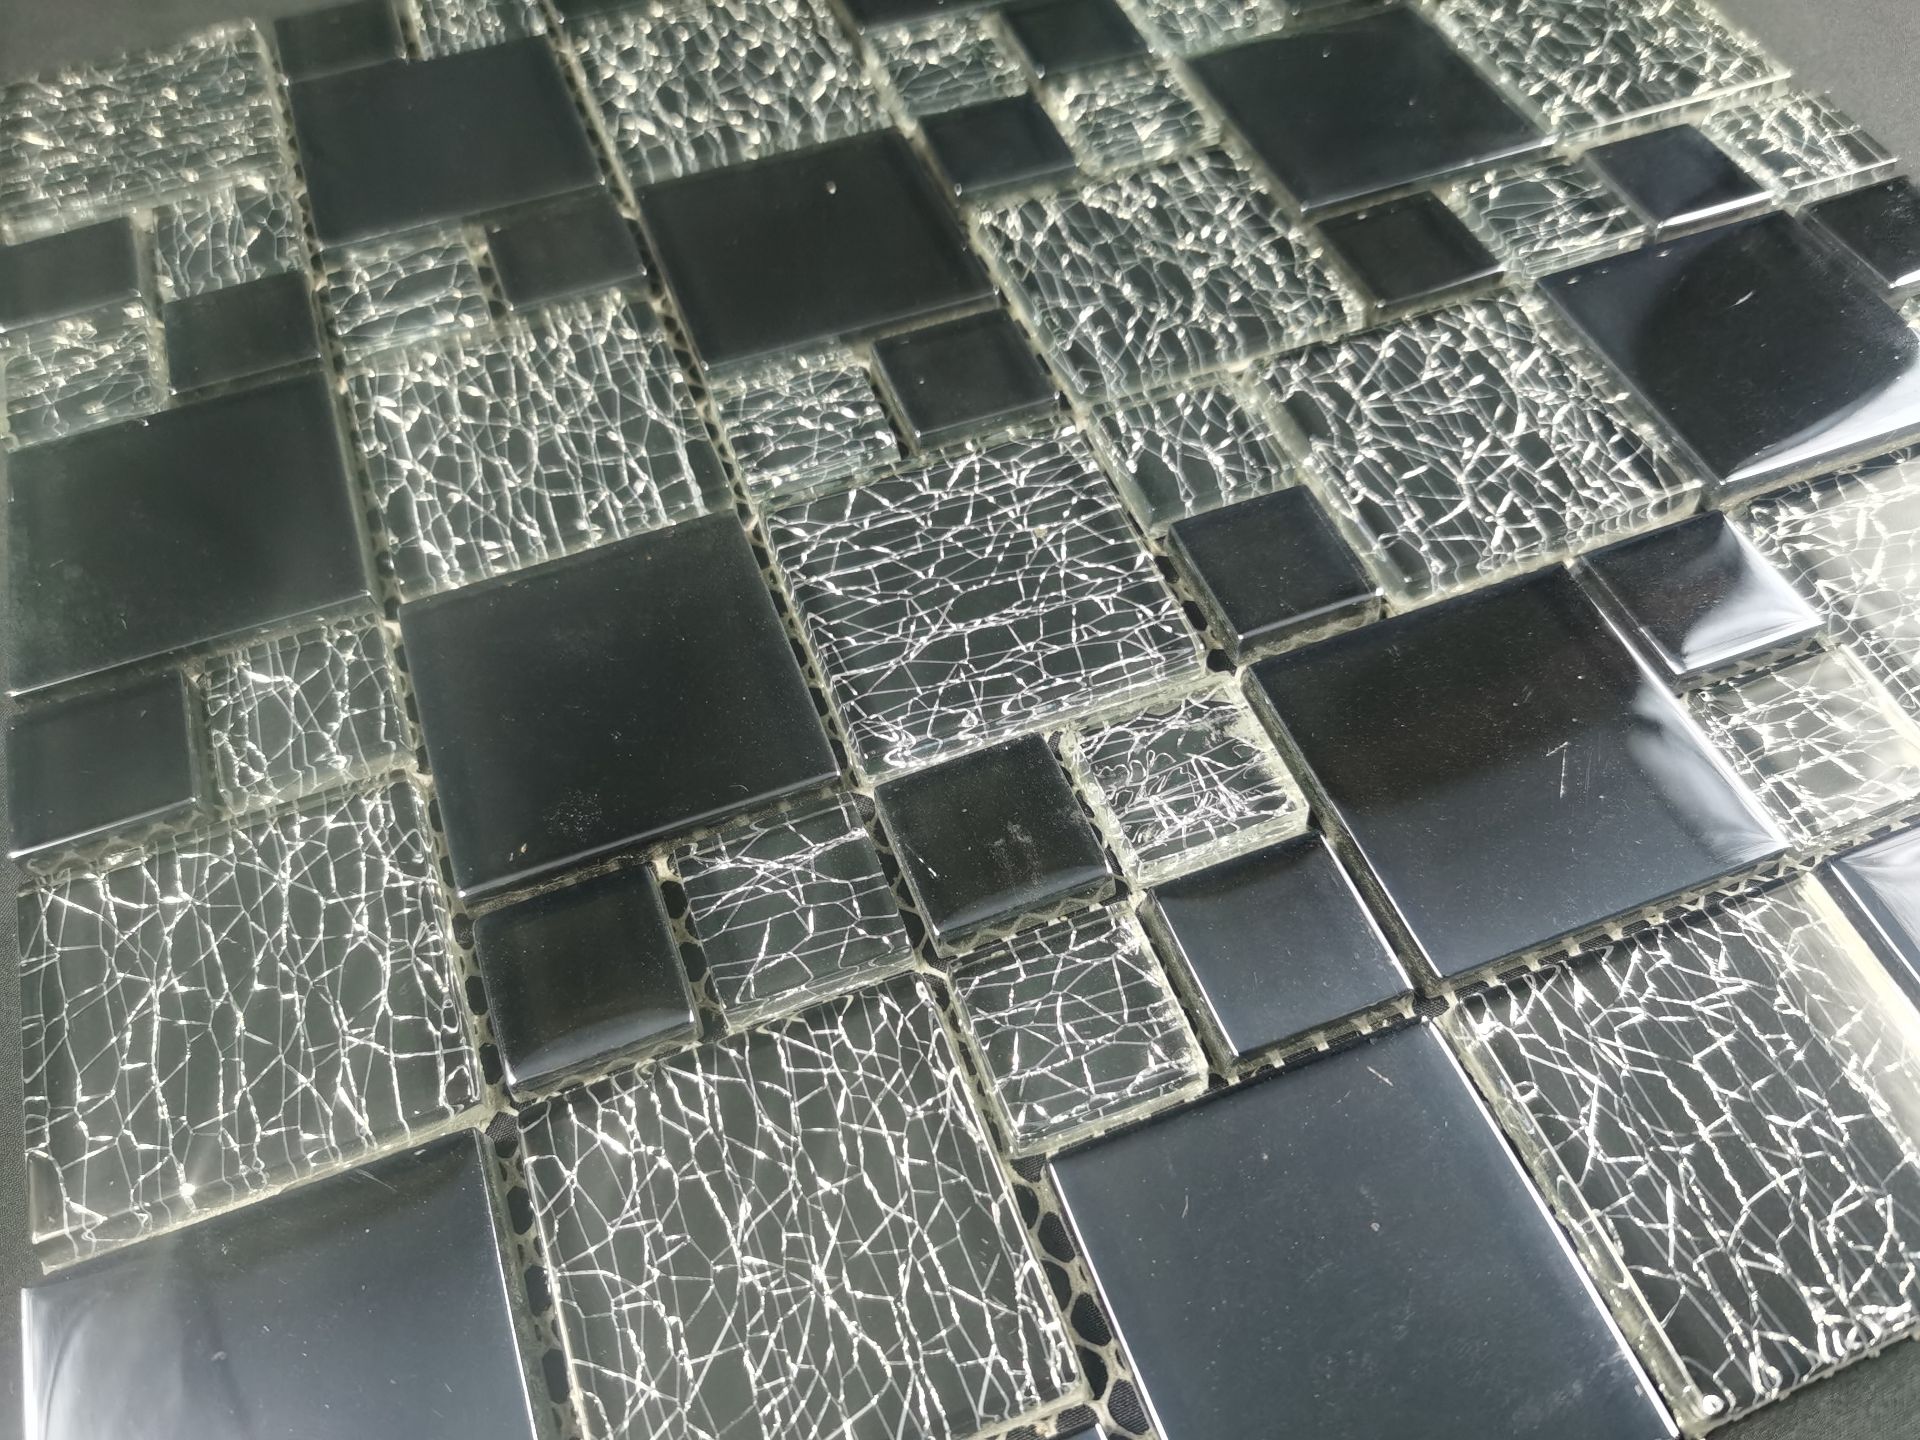 1 Square Metres- High Quality Glass Mosaic Tiles -- Super Saver 300*300*6mm* 11 Sheets - Image 5 of 5